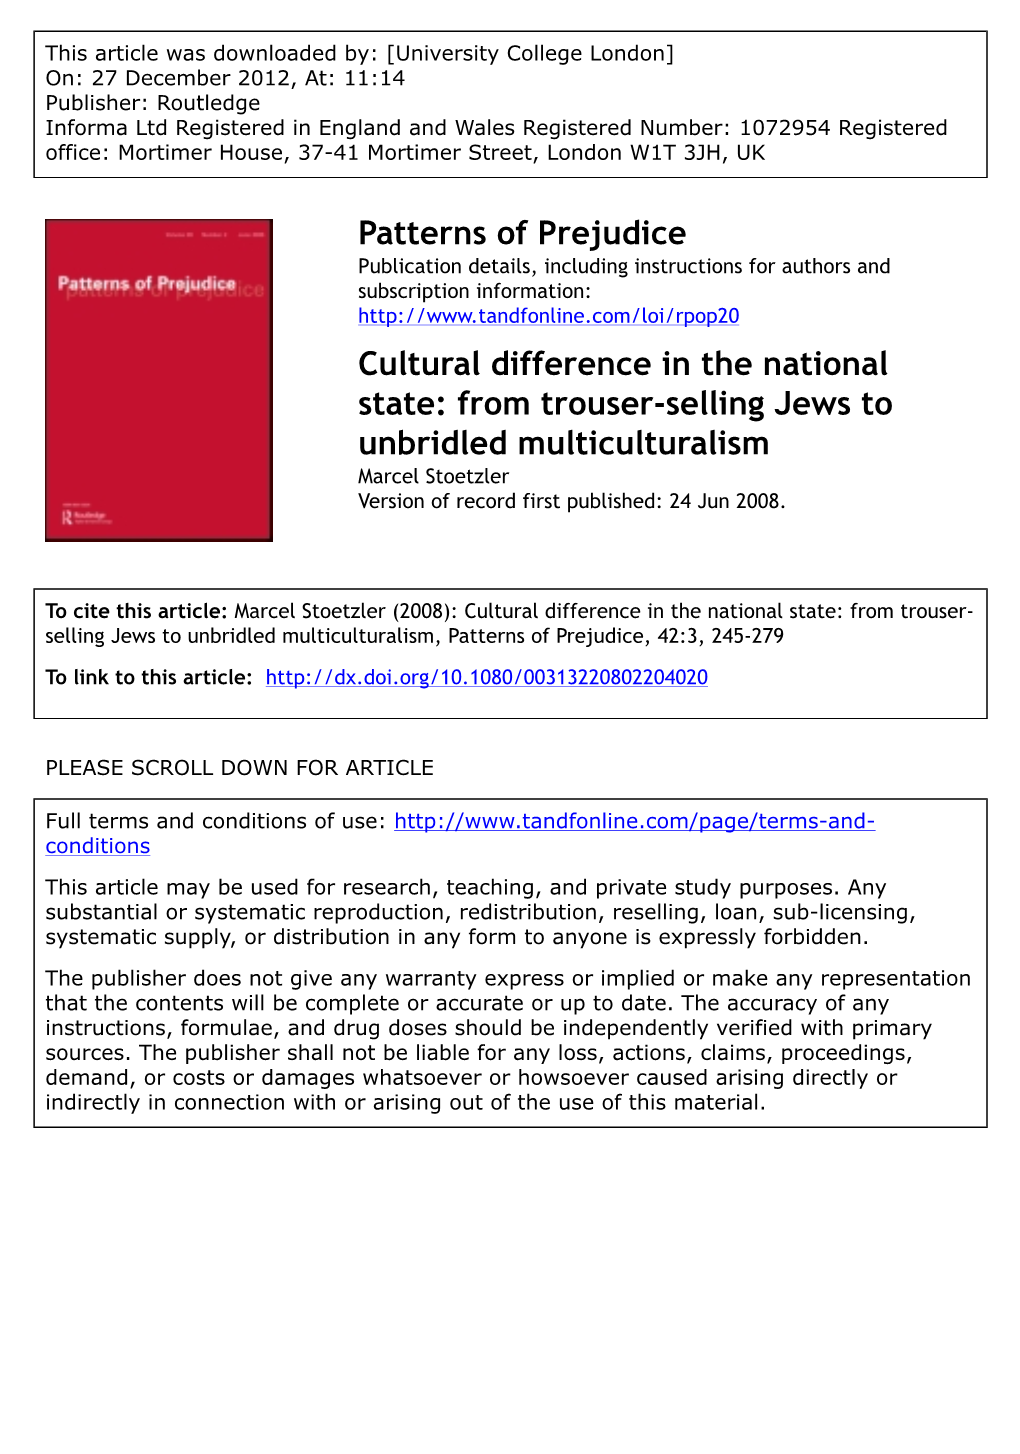 From Trouser-Selling Jews to Unbridled Multiculturalism Marcel Stoetzler Version of Record First Published: 24 Jun 2008